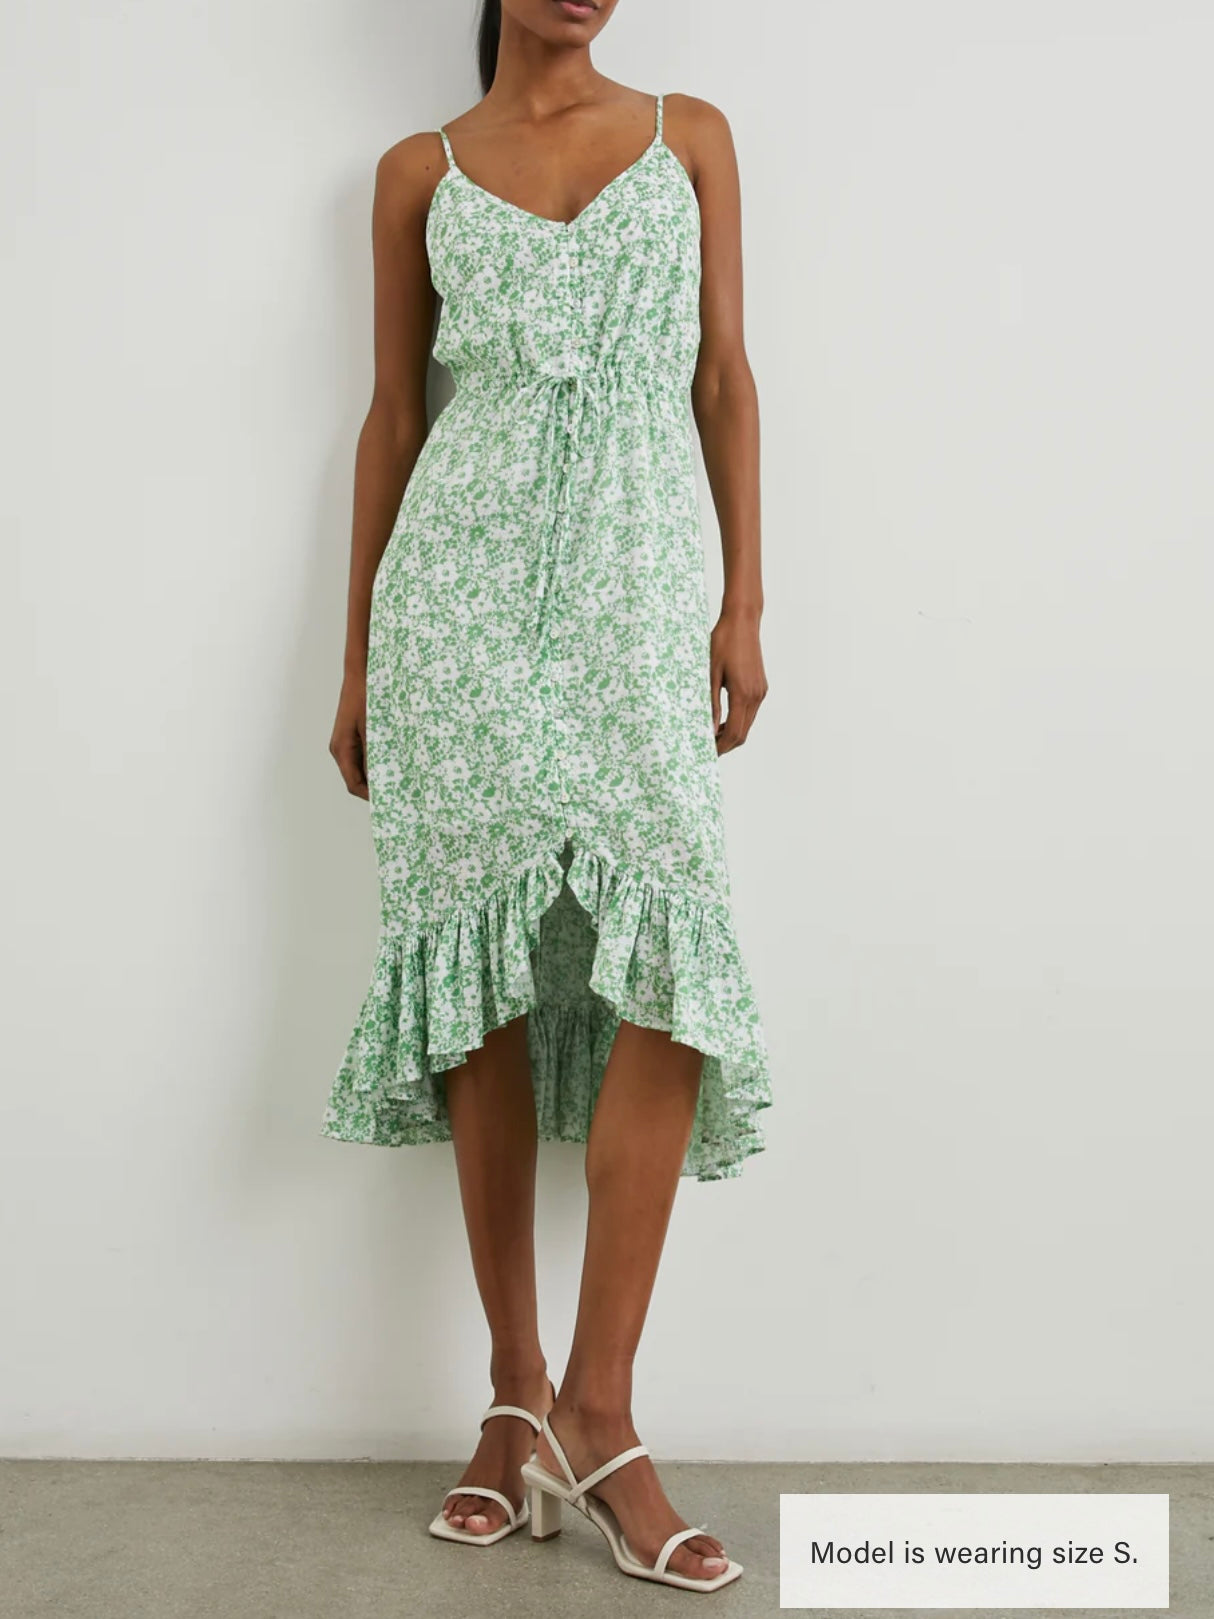 Rails Frida Dress in Green Texture Floral